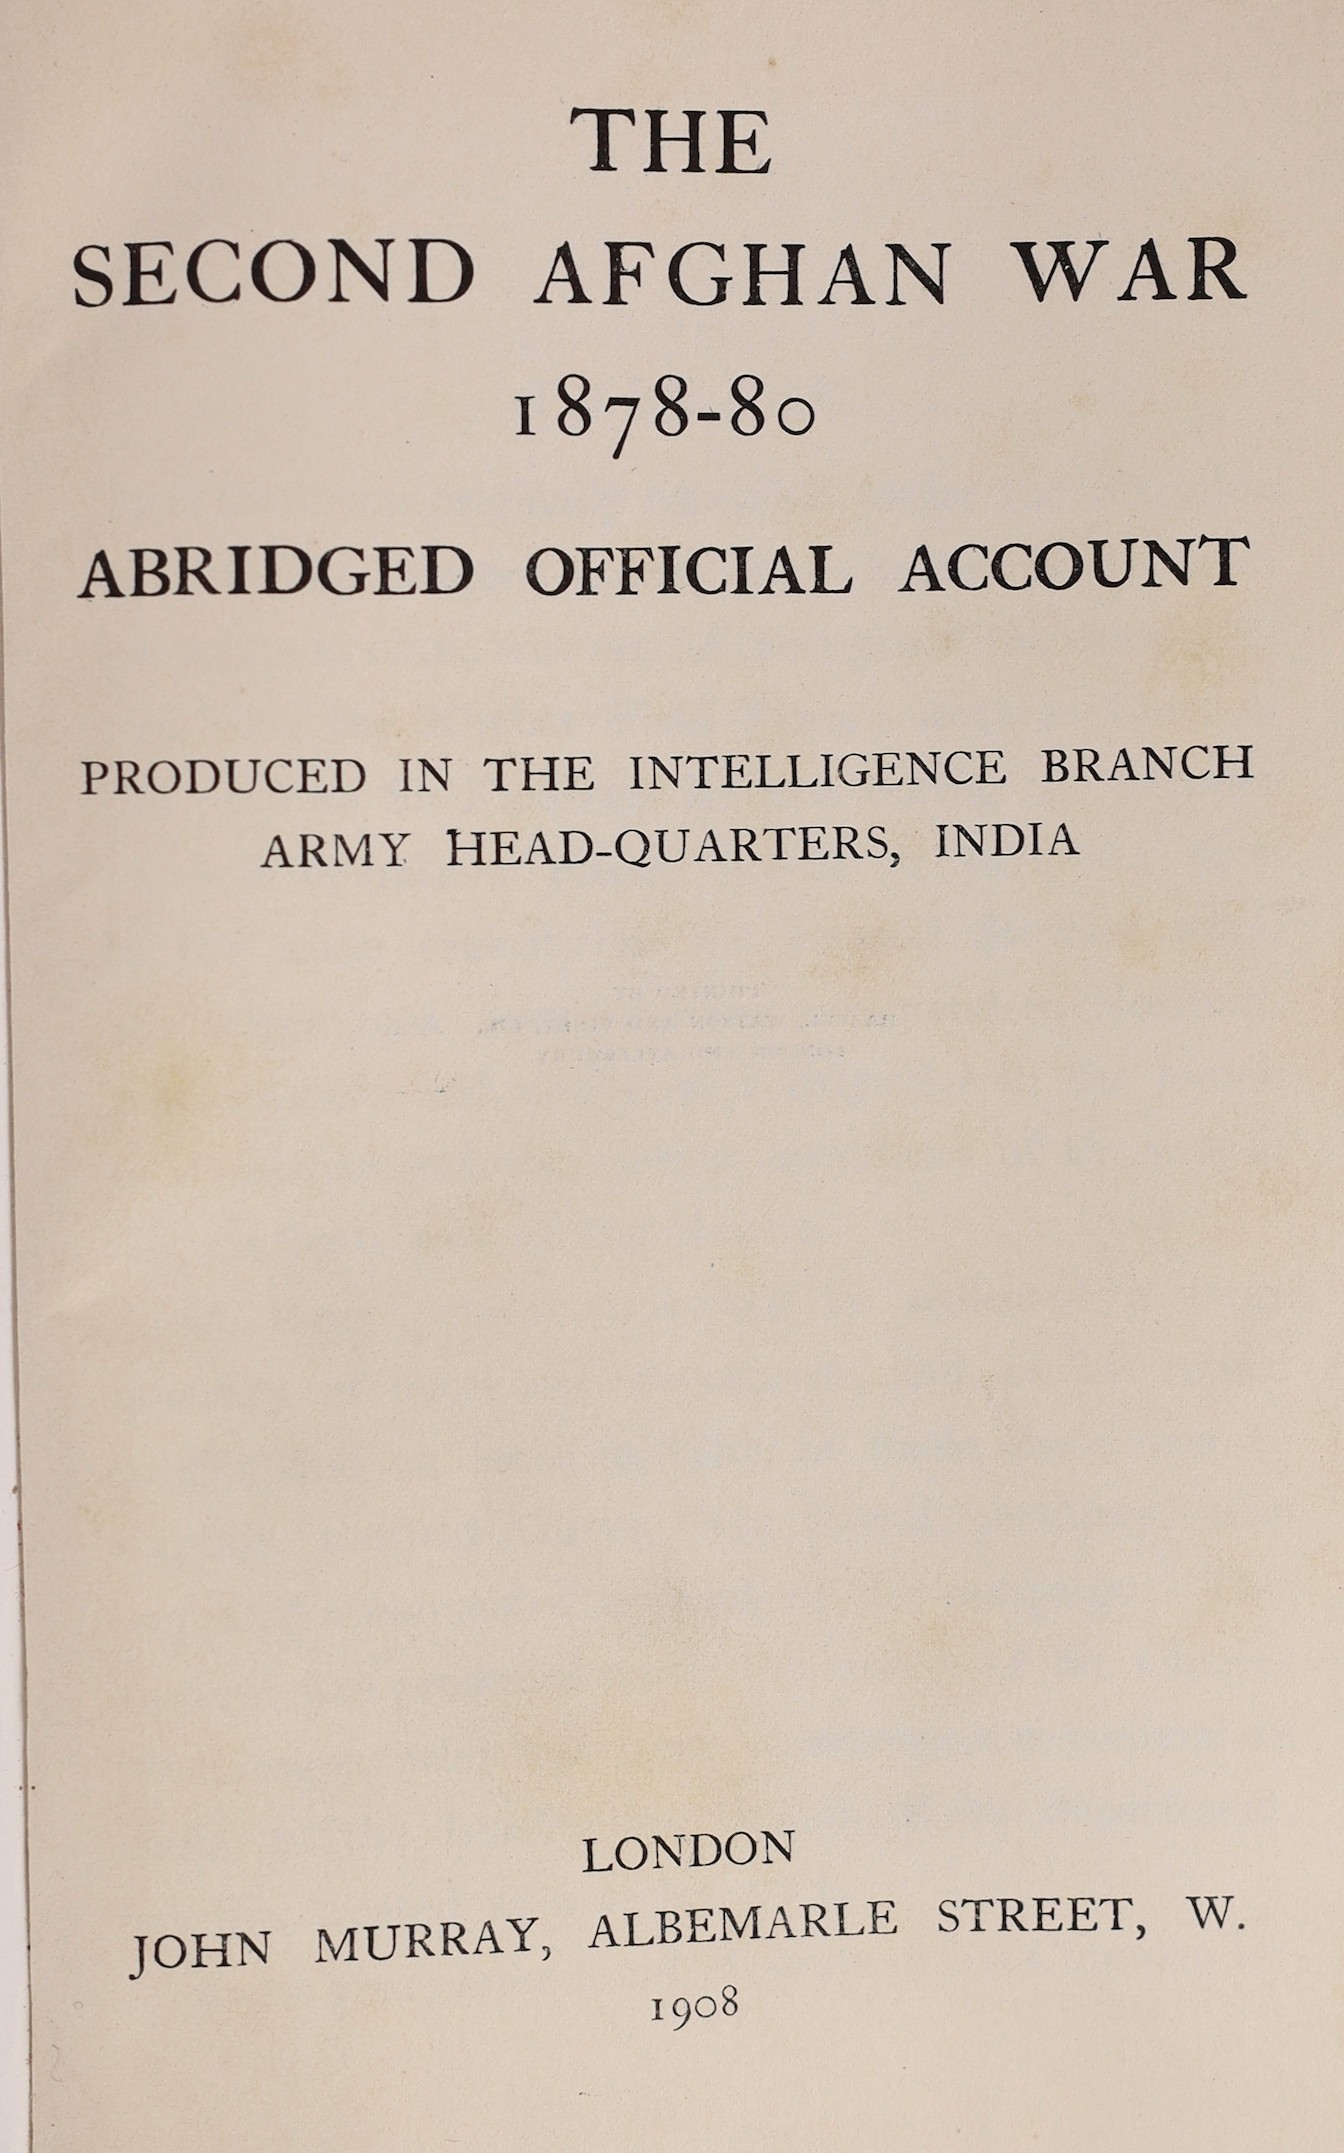 MacGregor, Charles Metcalfe, Sir and Cardew, Francis Gordon - The Second Afghan War, 1878-80, Abridged Official Account, Produced in the Intelligence Branch Army Head-Quarters, India, 1st (and only) edition, 8vo, origina